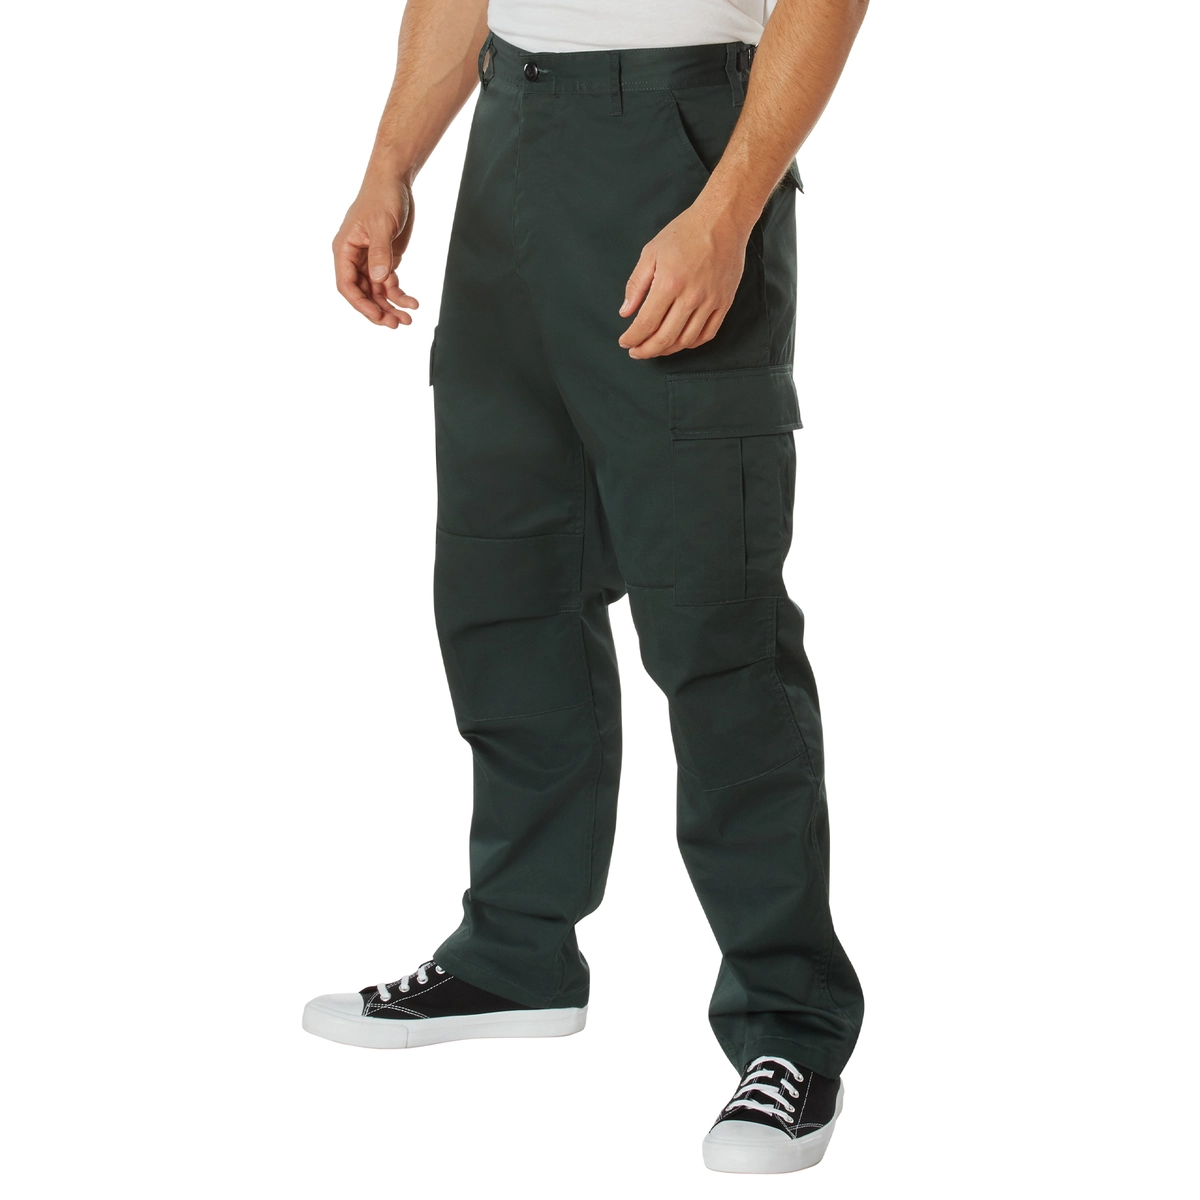 New hunter green color cargo pants